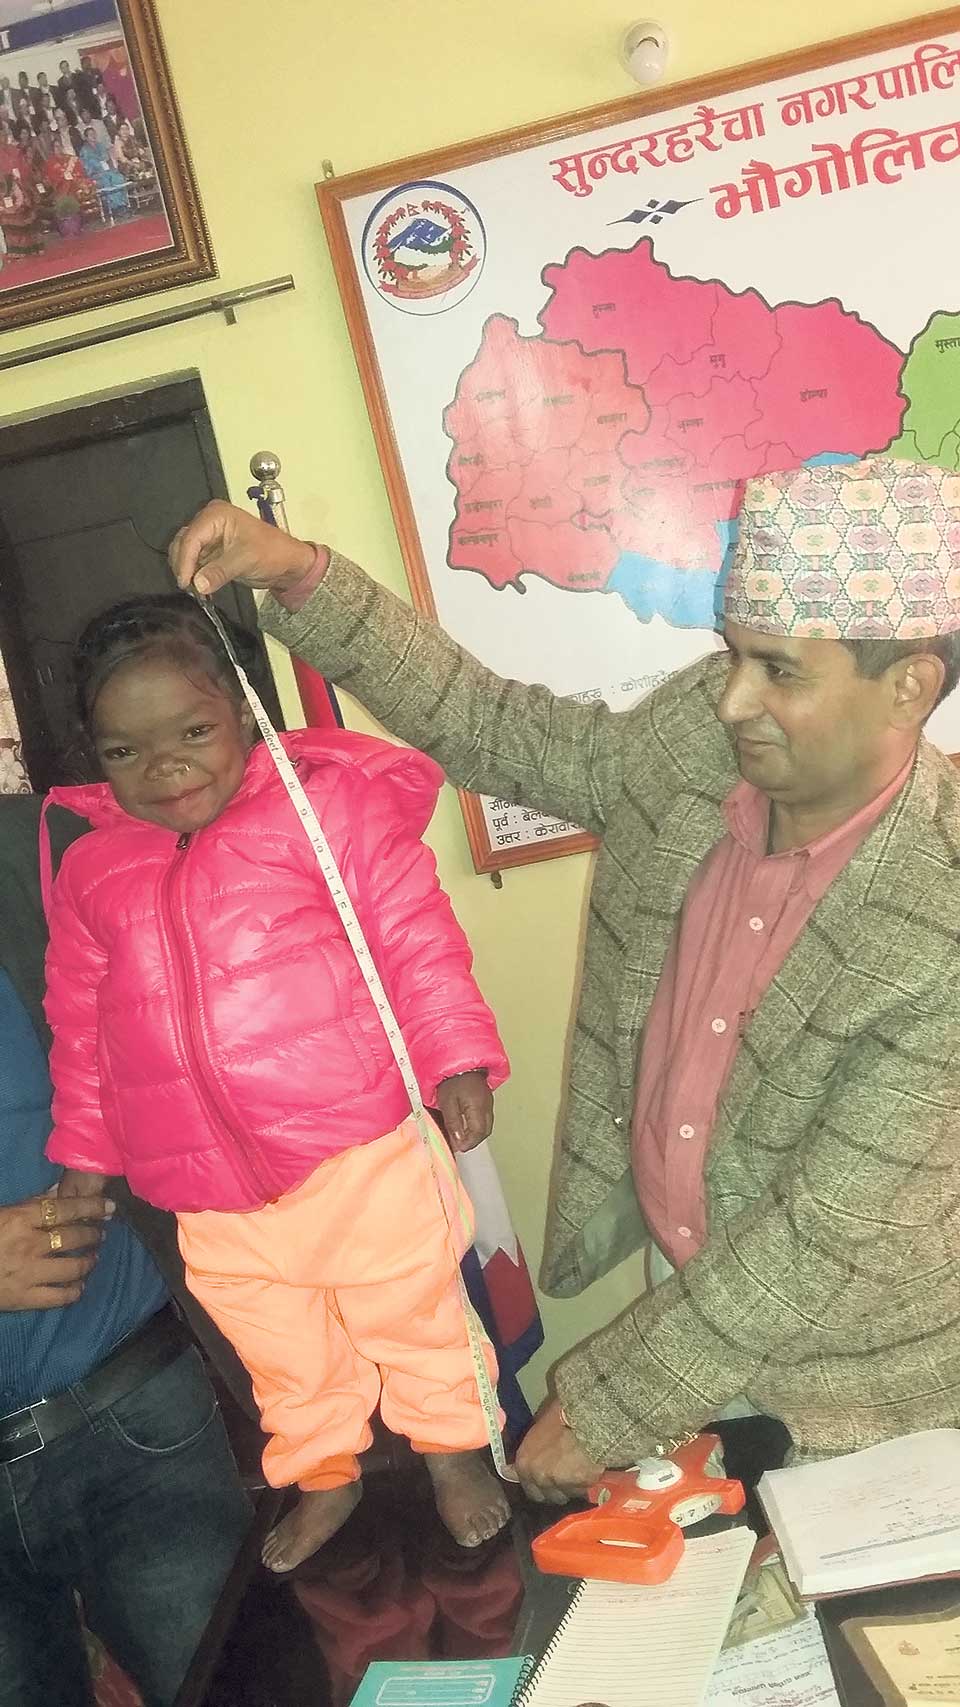 32-inch tall Malati could be Nepal’s shortest woman